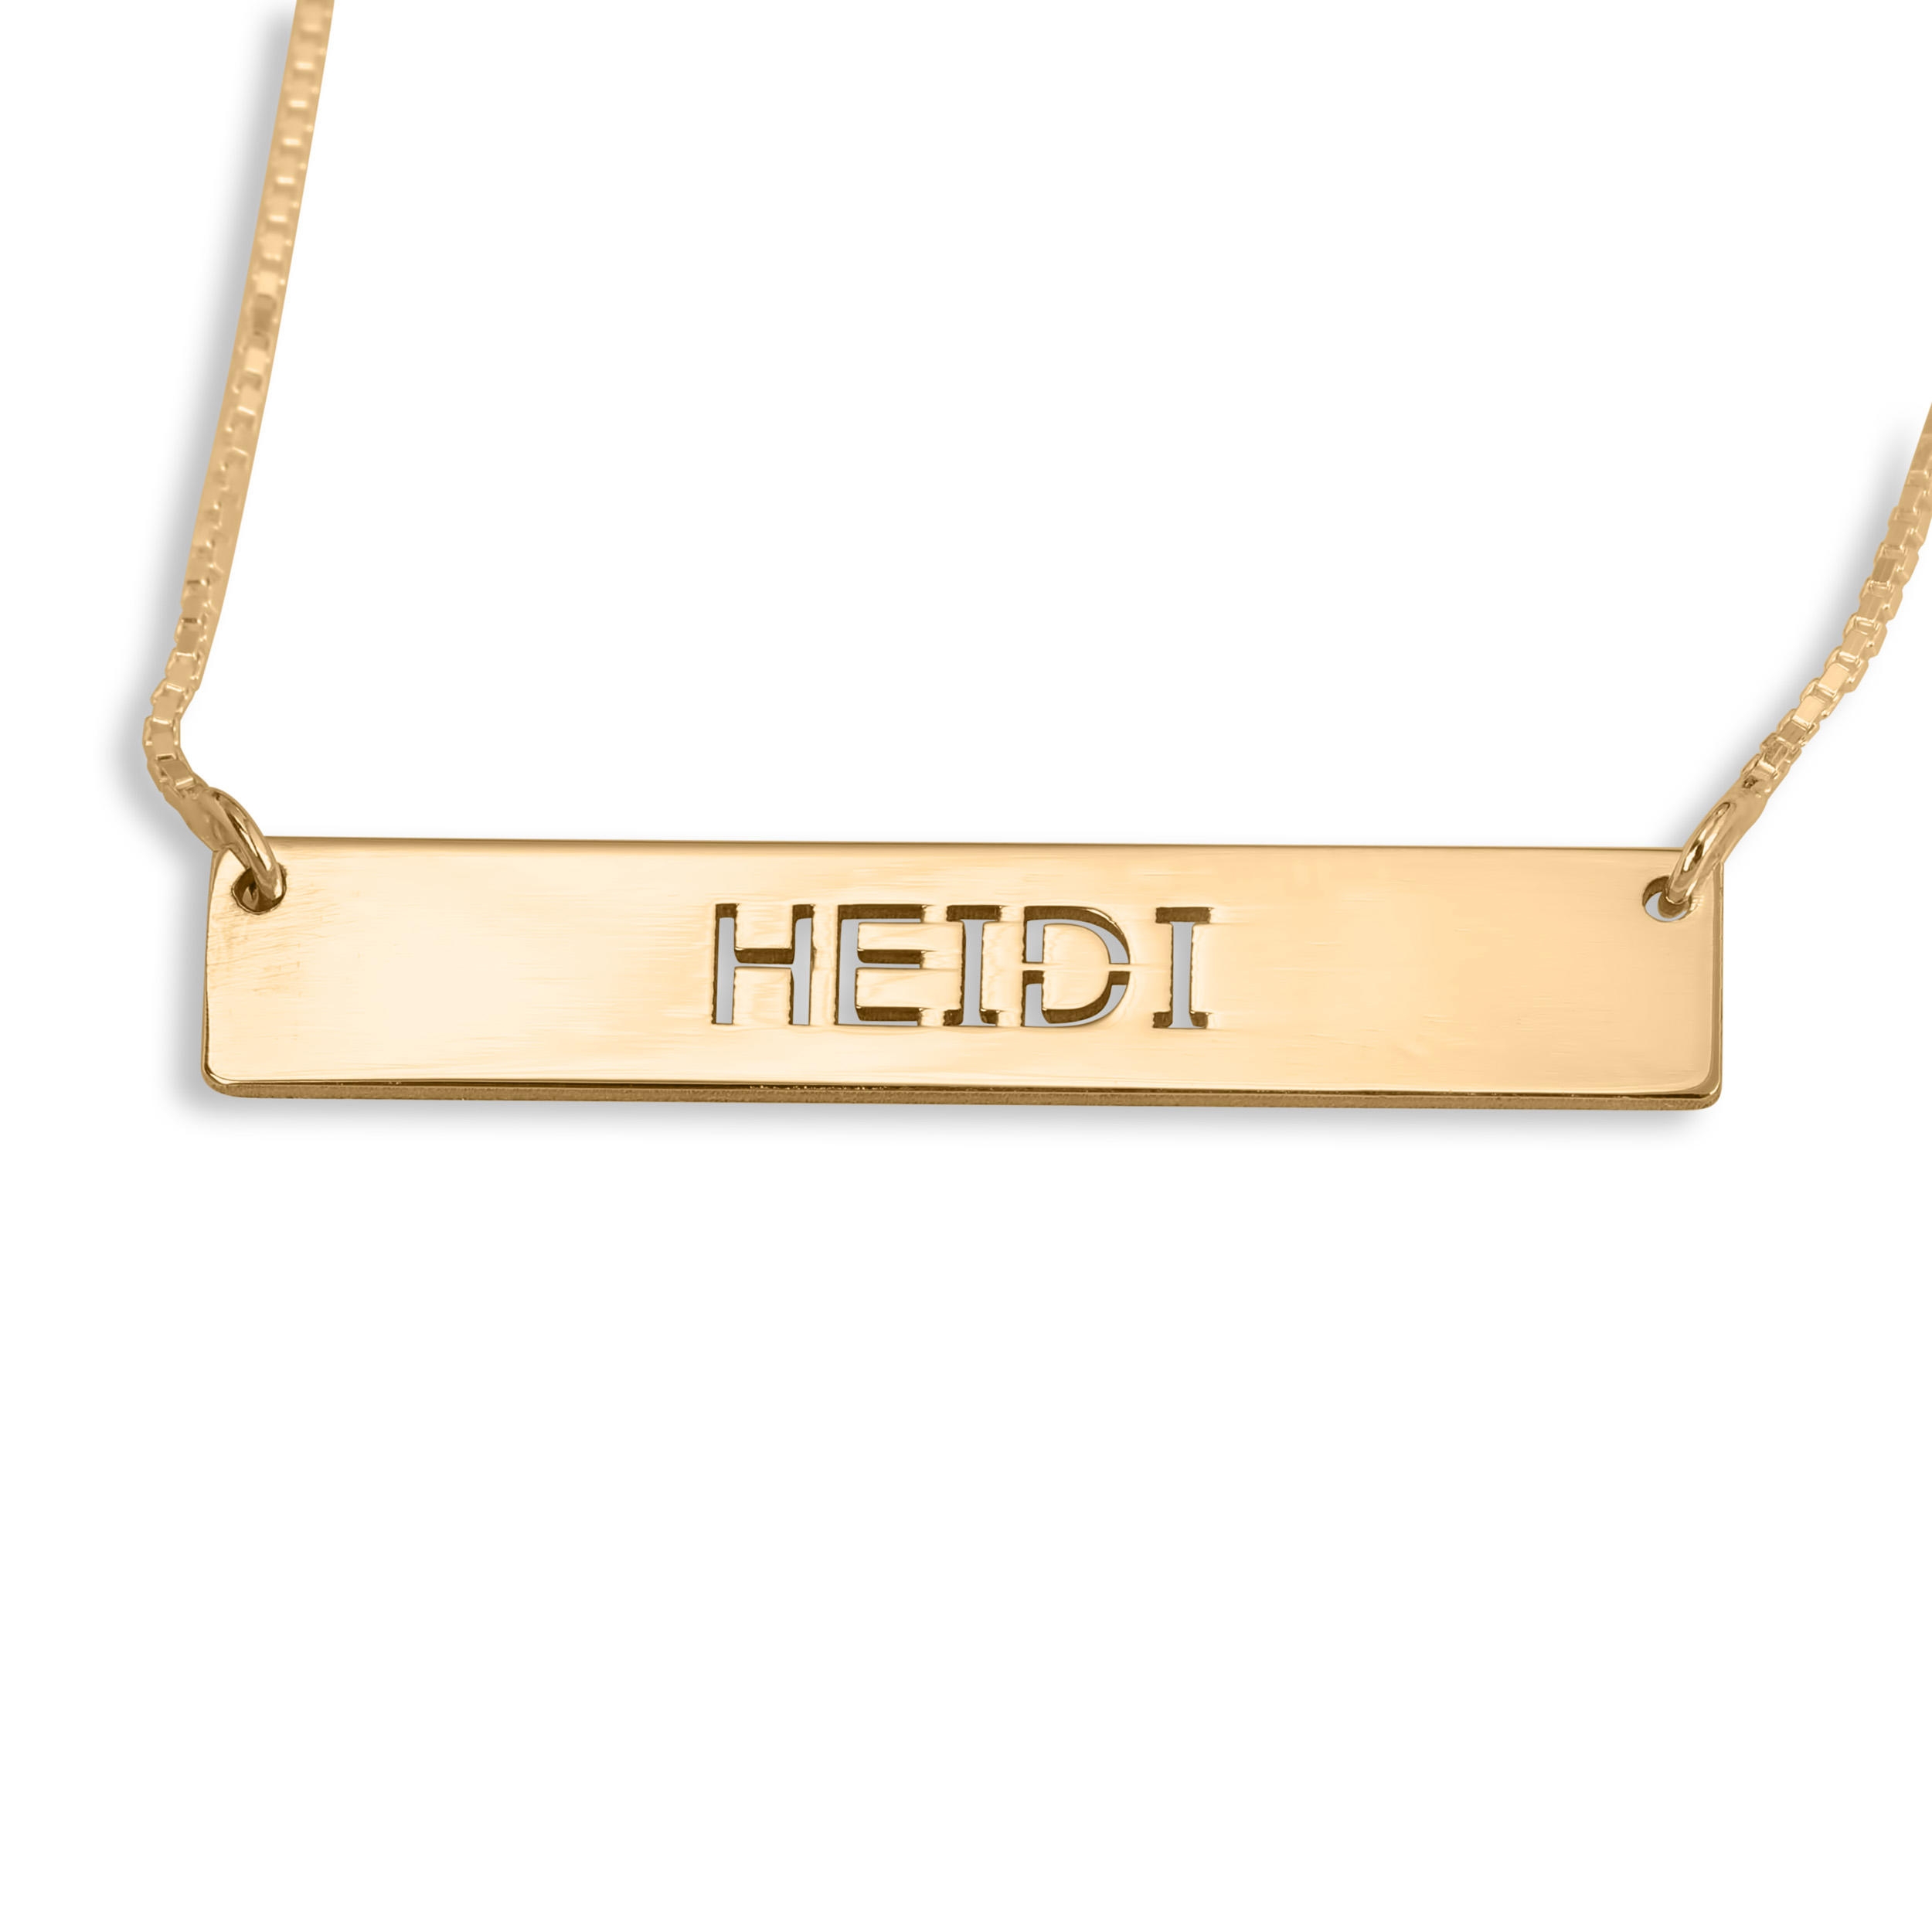 Gold Tone Personalized Laser Engraved Name Plate Bar Chain Necklace  Engraving Pendant 1008